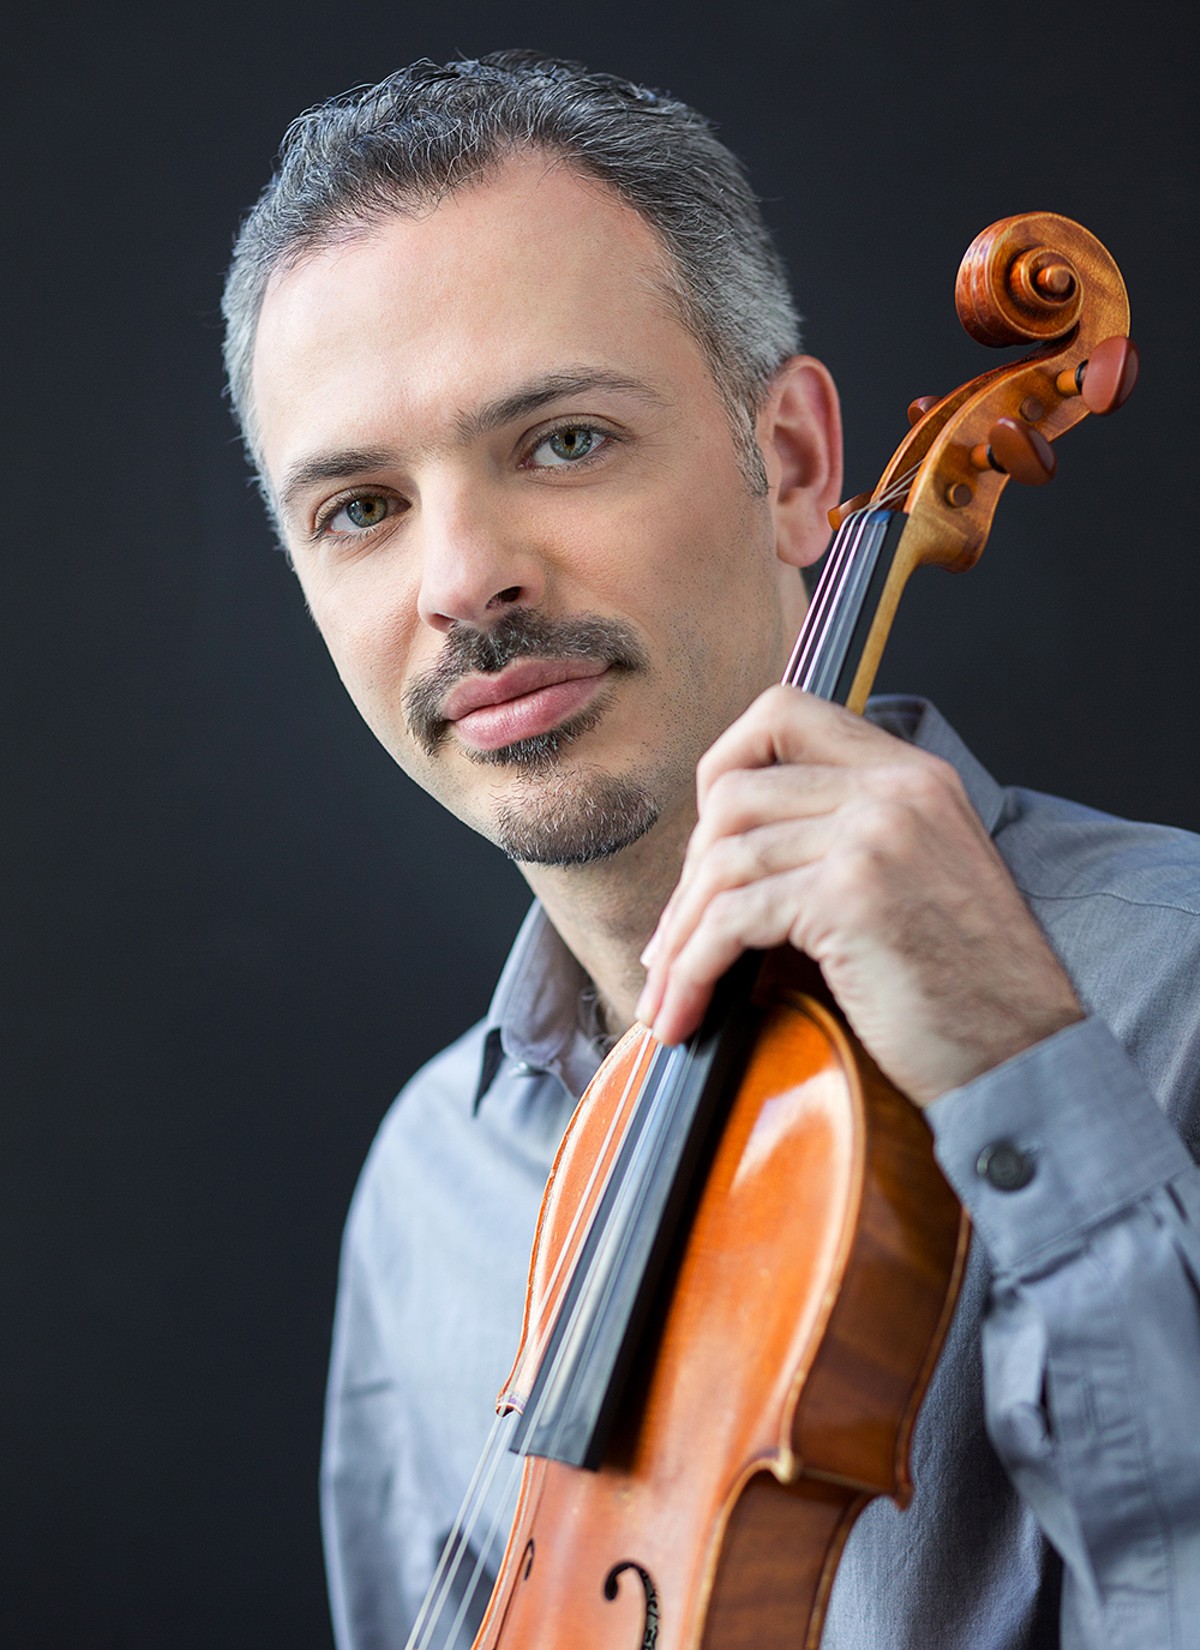 Violinist and composer Colin Jacobsen